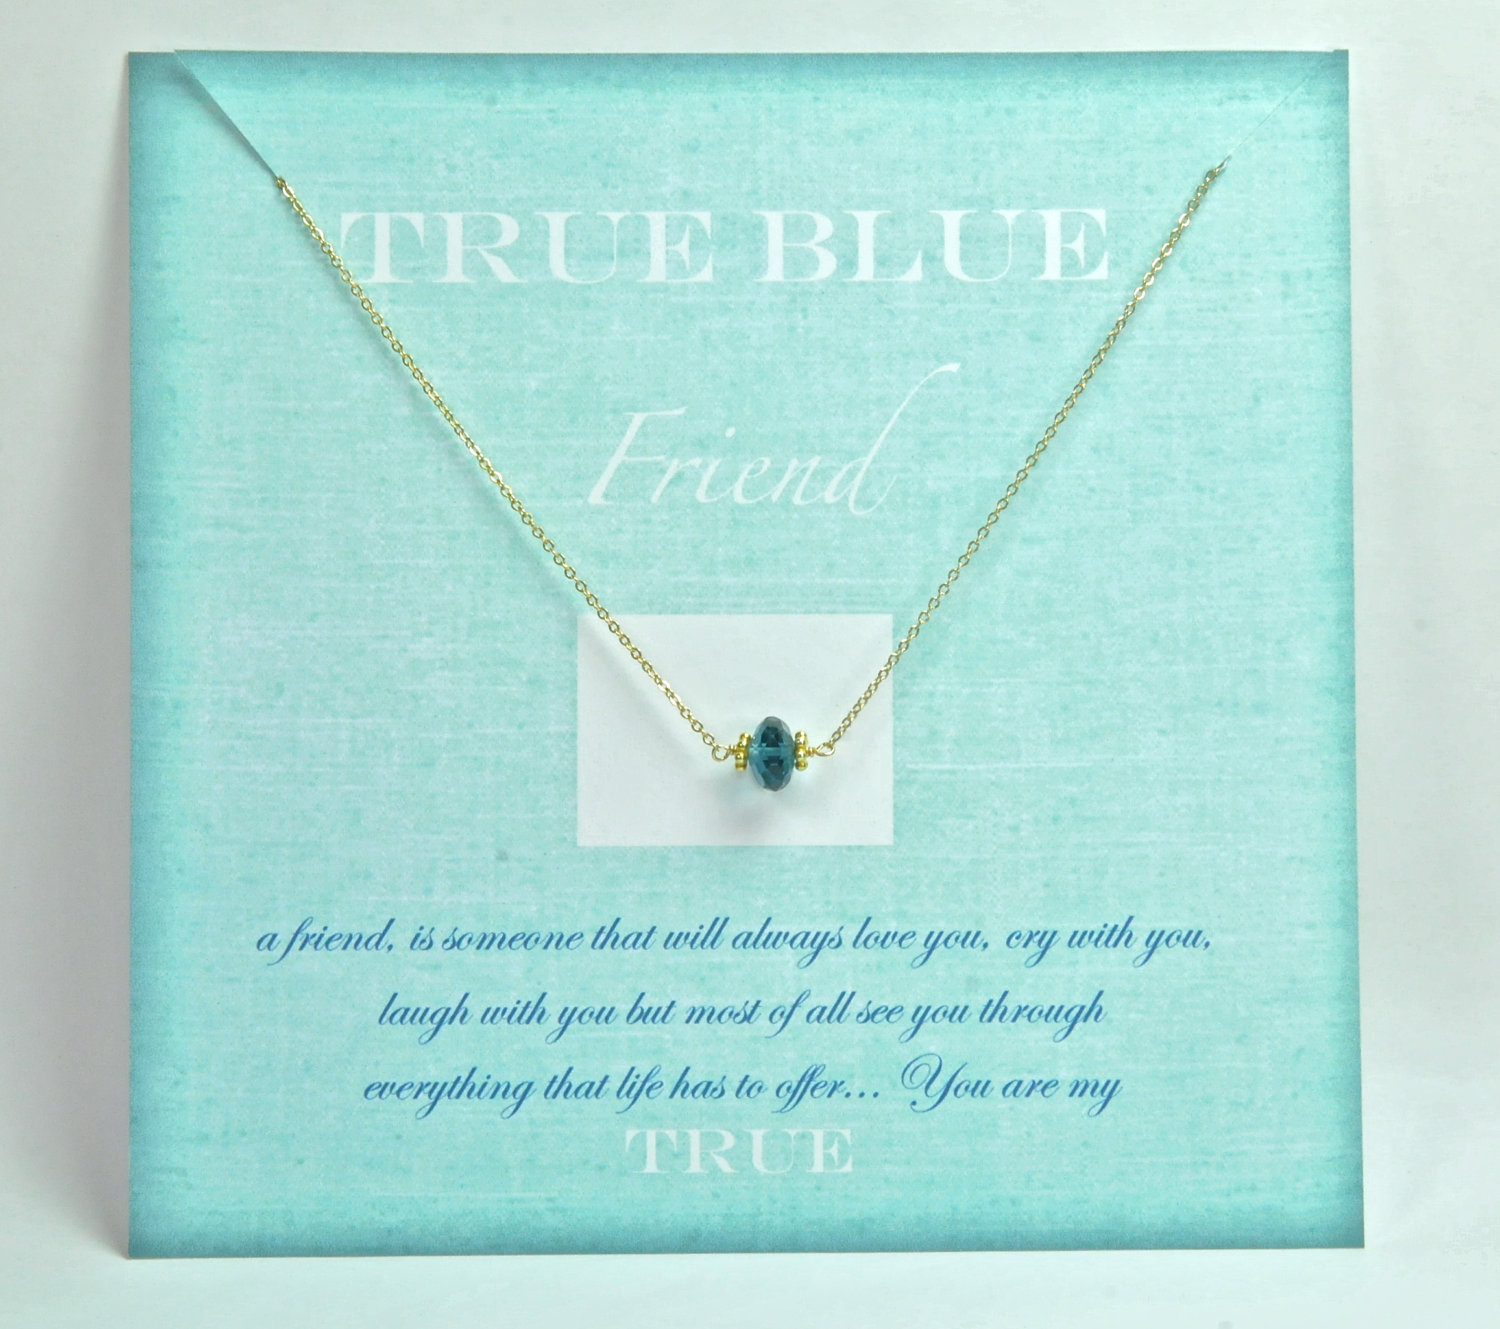 Blue Topaz Necklace/ Gift with Card/ True Blue Friend Gift